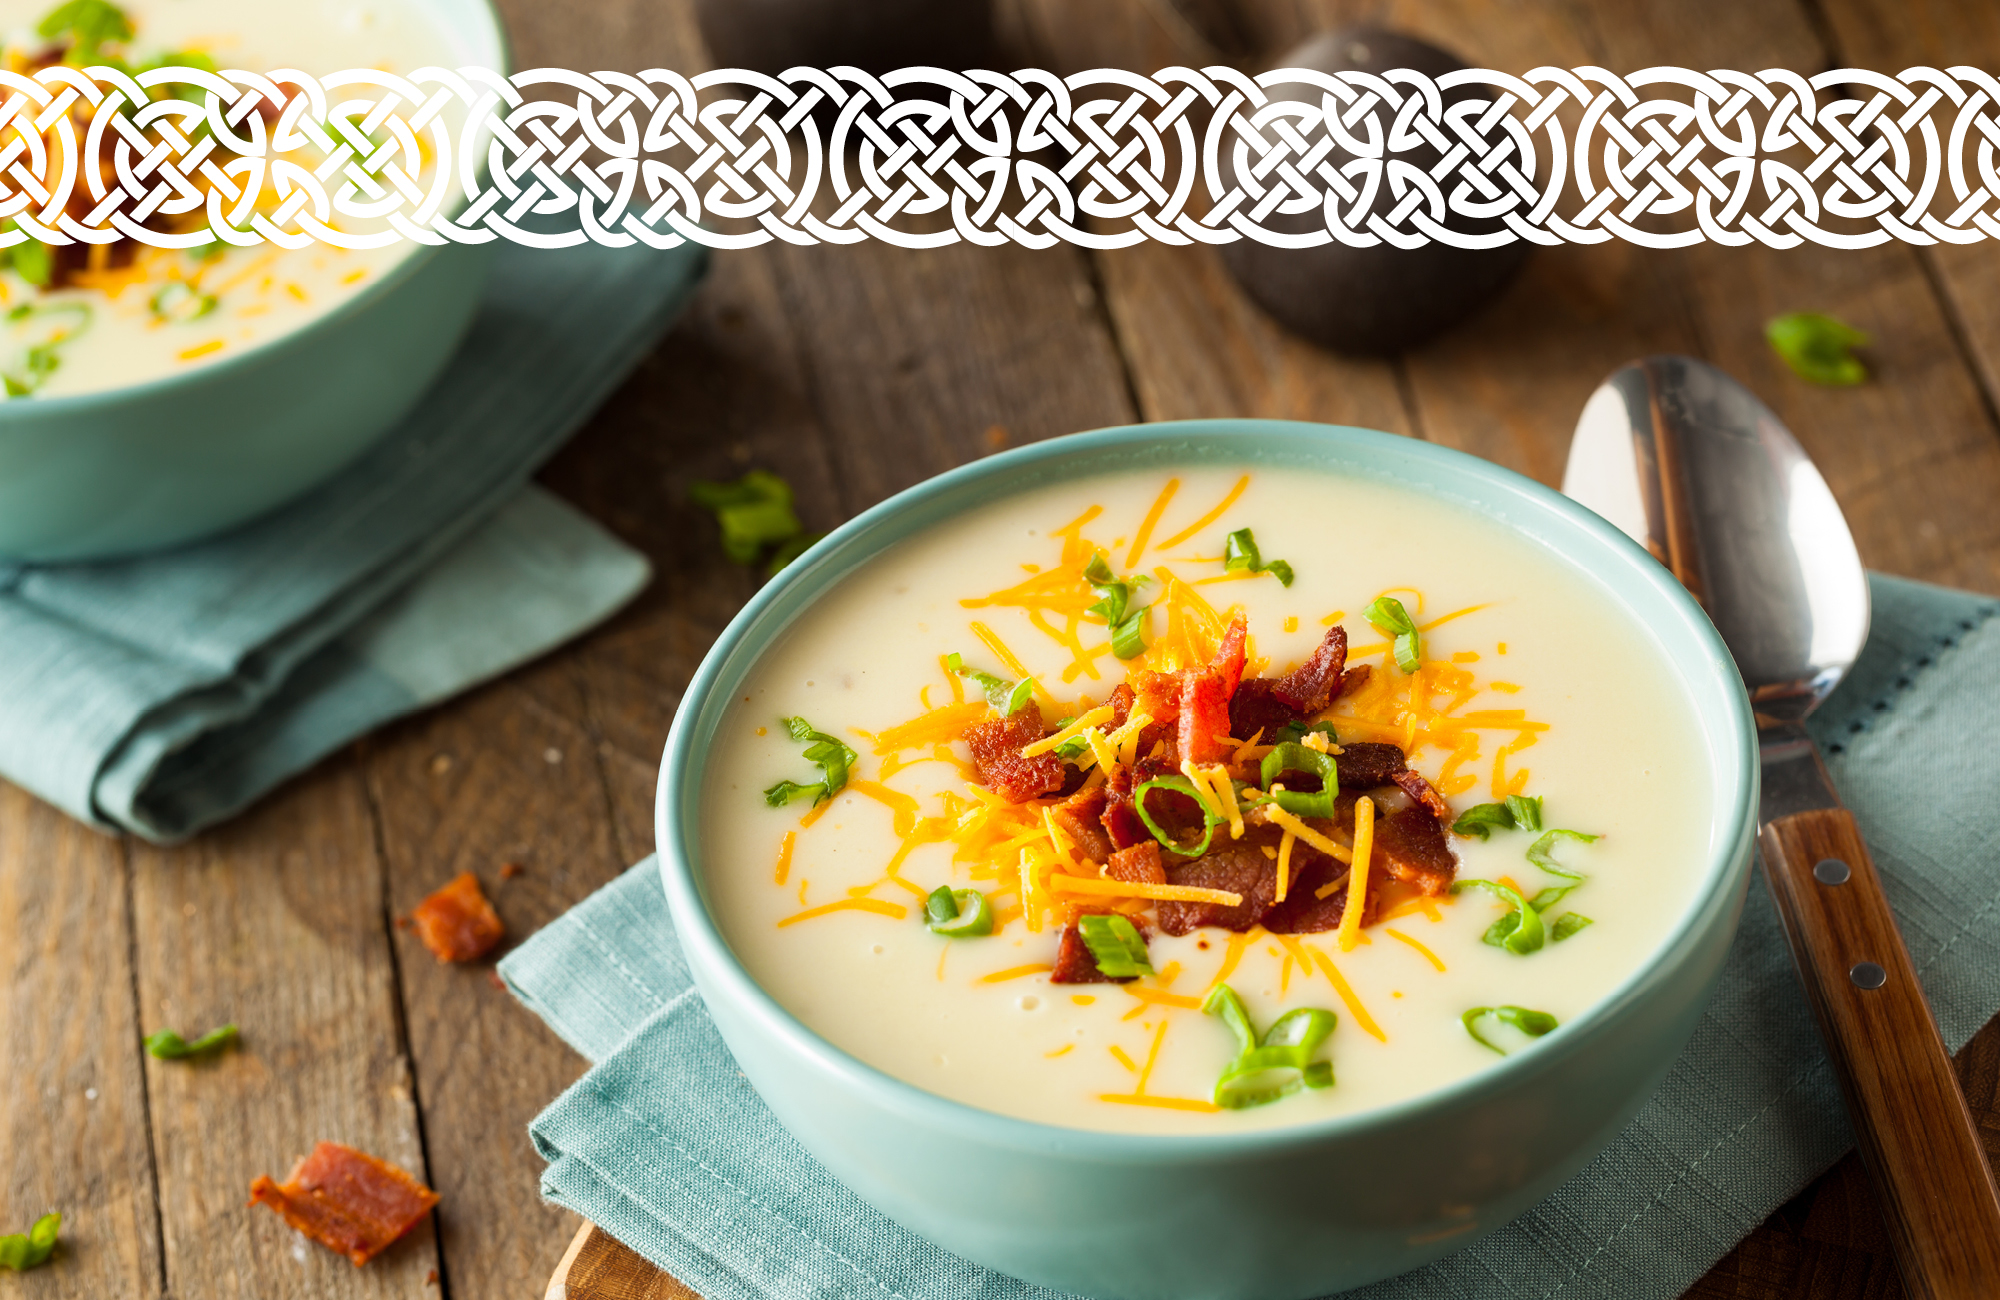 Celebrate St. Patty's Day with this Traditional Irish Potato Soup